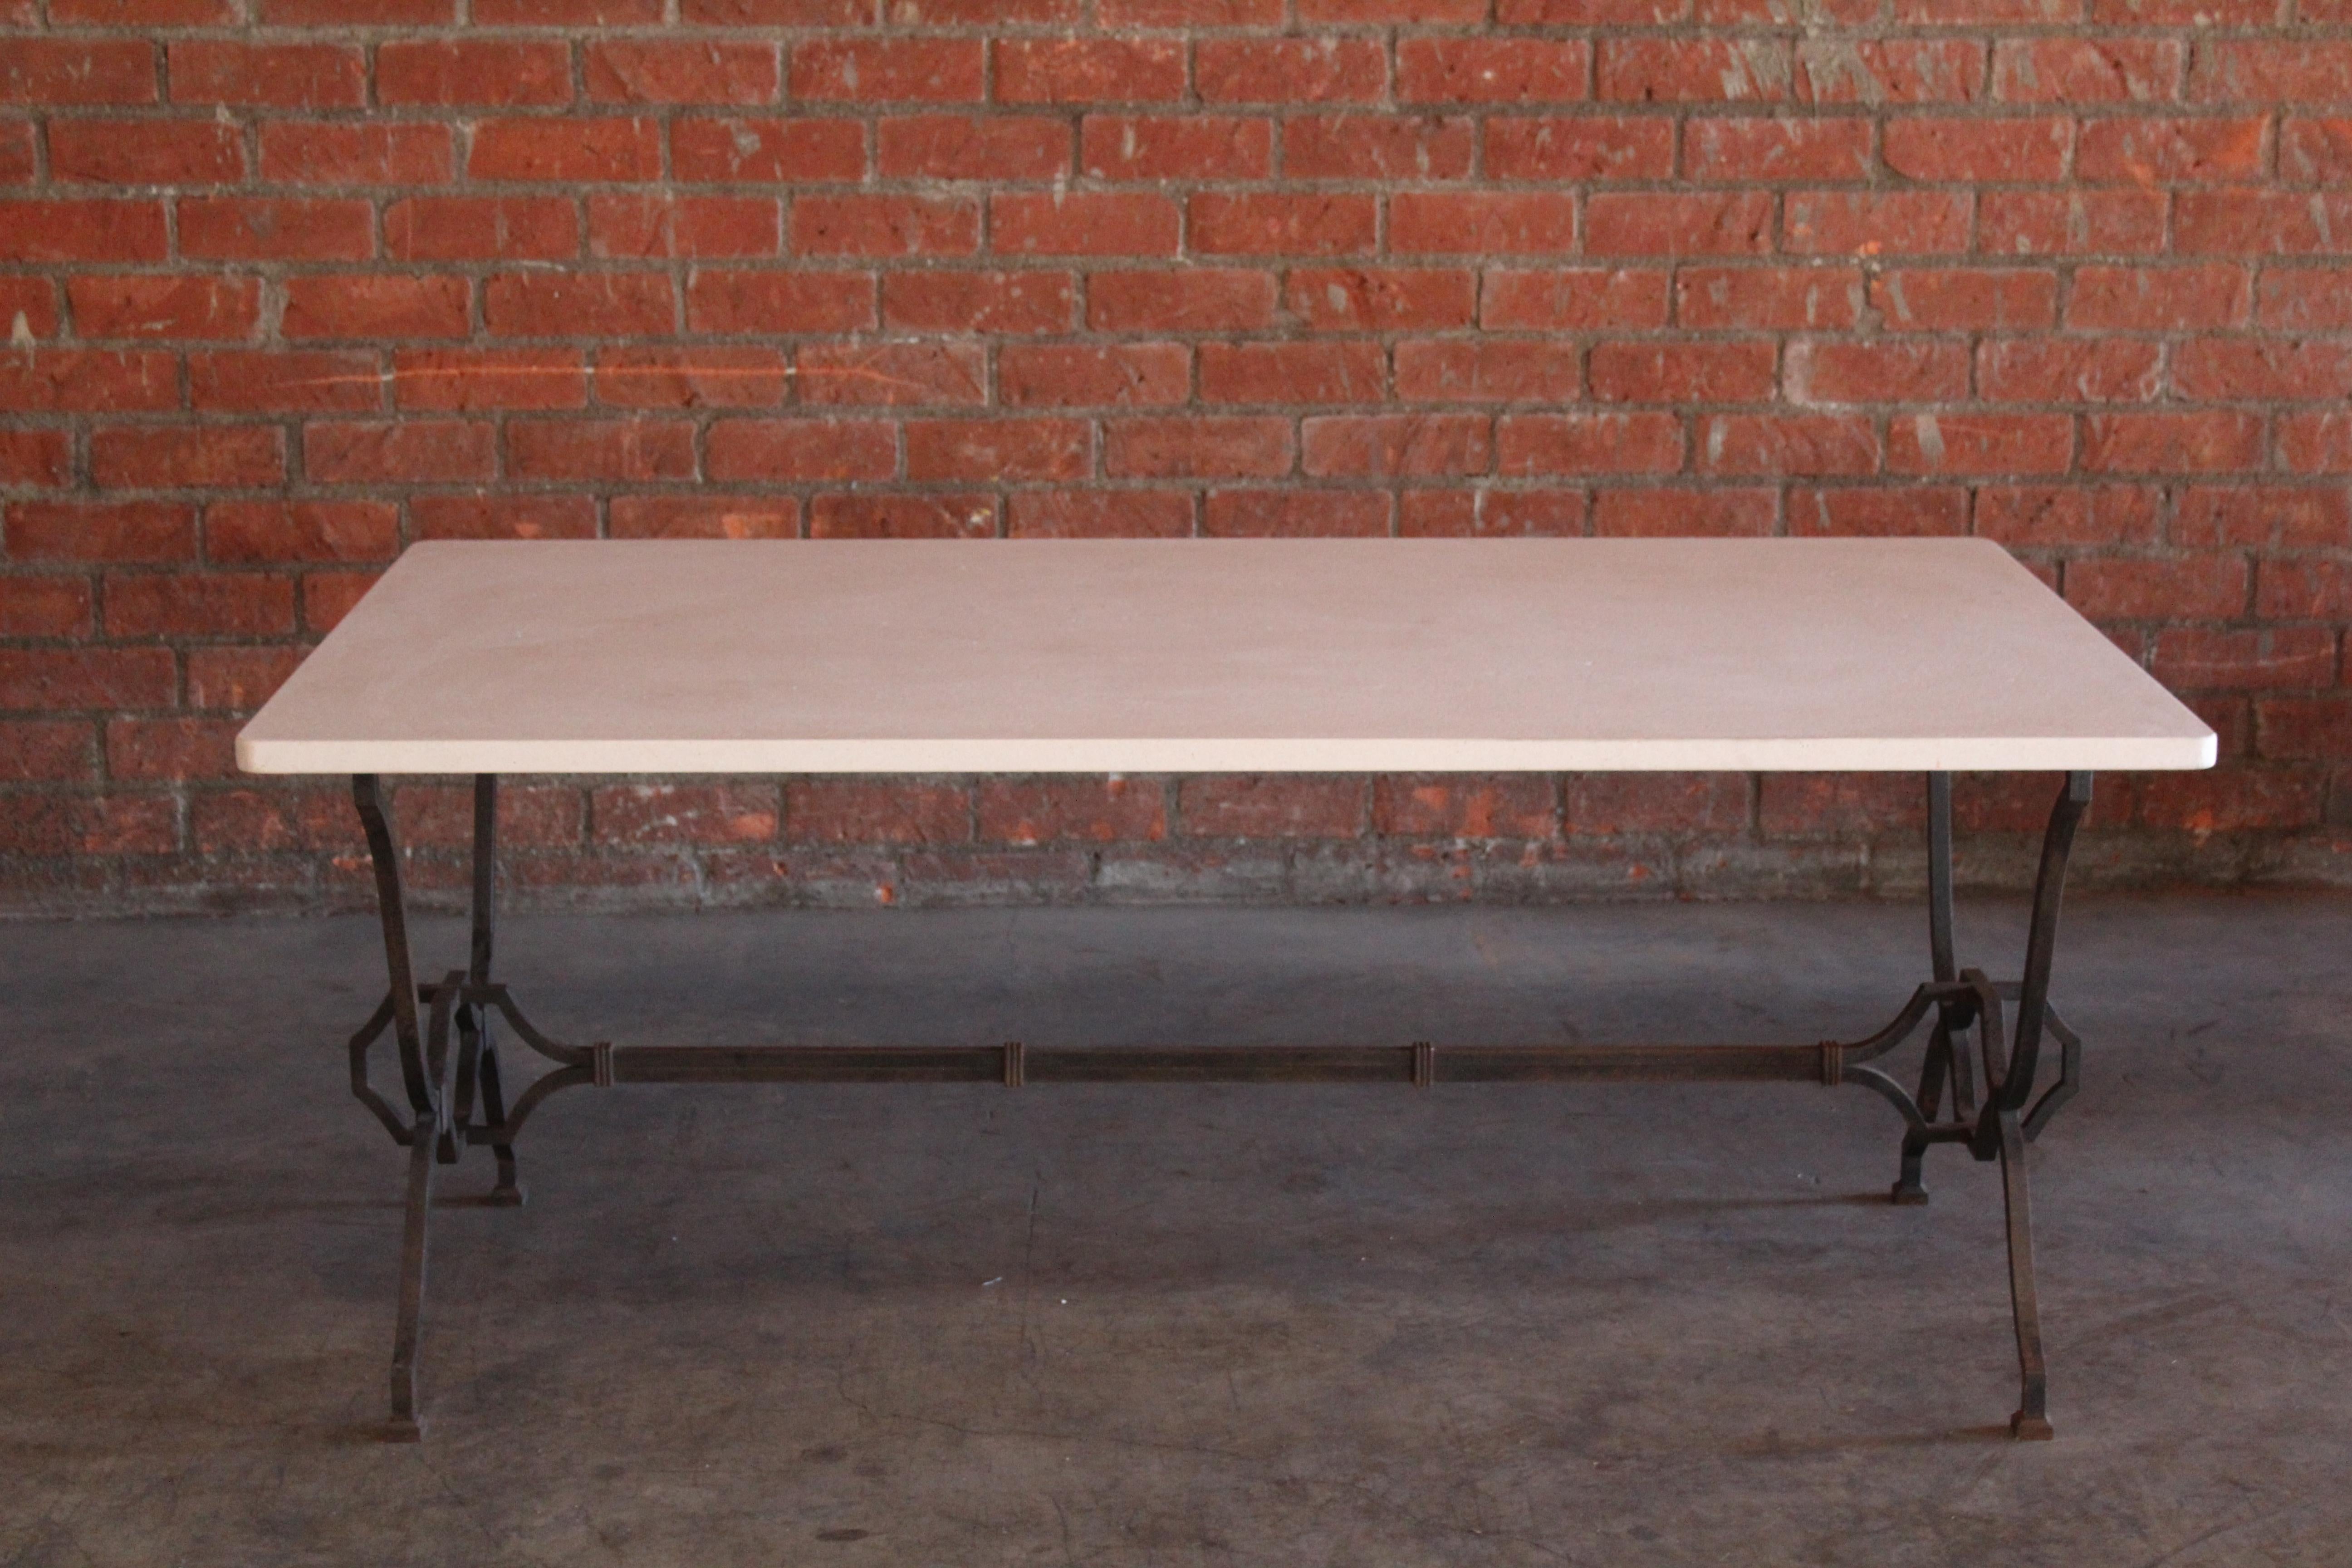 1940s French Wrought Iron and Limestone Table by Colette Gueden for René Prou For Sale 3